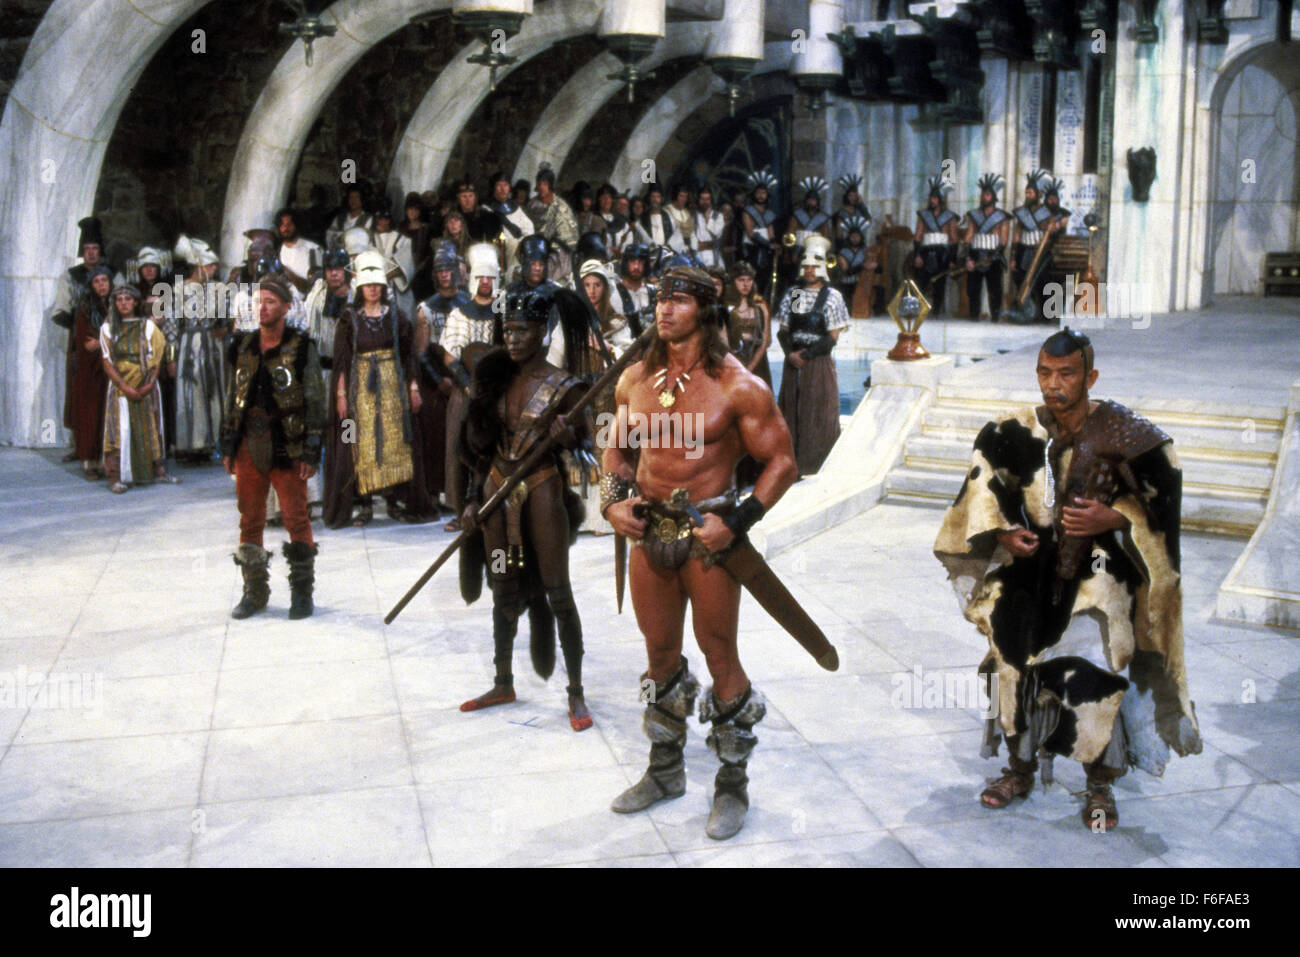 RELEASE DATE: June 29, 1984  MOVIE TITLE: Conan the Destroyer  DIRECTOR: Richard Fleischer   STUDIO: De Laurentiis  PLOT: The wandering barbarian, Conan, alongside his goofy rogue pal, Malak, are tasked with escorting Queen Taramis' virgin niece, Princess Jehnna and her bodyguard, Bombaata, to a mystical island fortress. They must retrieve a magical crystal that legends say can awaken the god of dreams, Dagoth. Along the way, Conan reunites with the wise wizard, Akiro and befriends the fierce female fighter, Zula  PICTURED: ARNOLD SCHWARZENEGGER as Conan and MAKO as Akiro  (Credit Image: c De Stock Photo